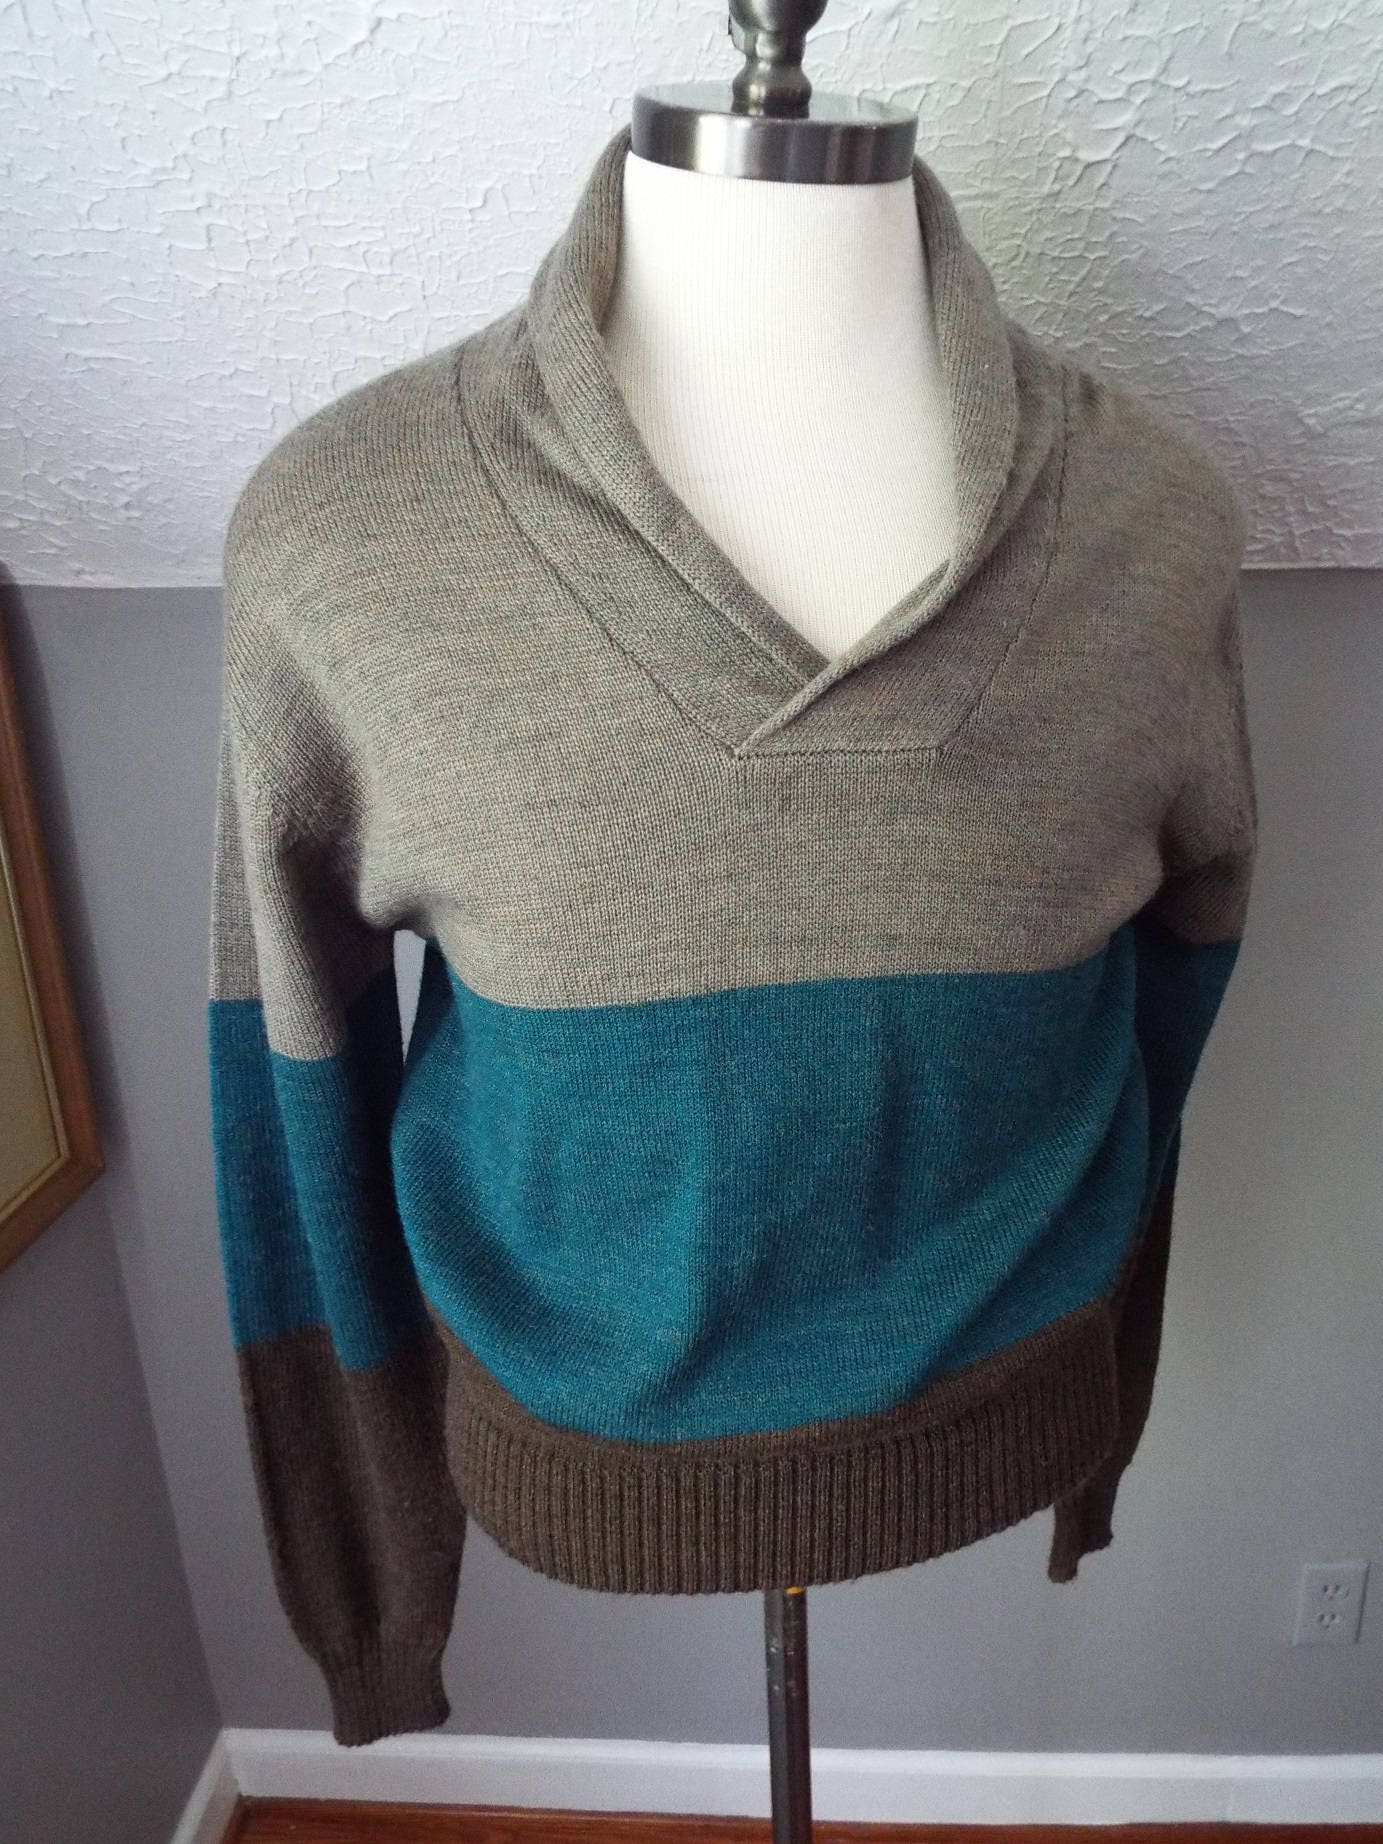 Vintage Long Sleeve Sweater by Gary Reed